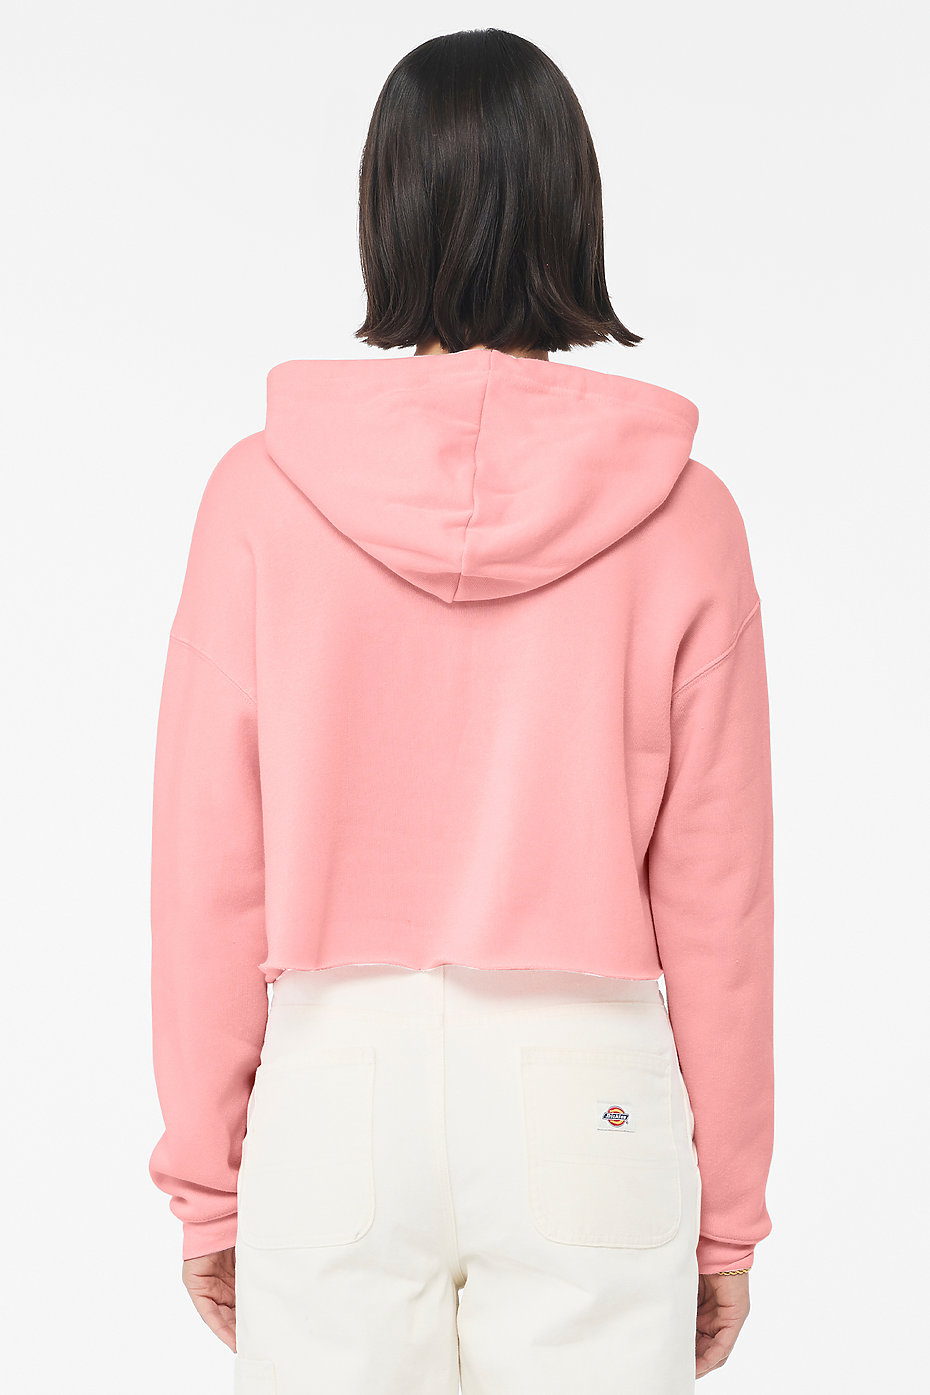 A Closer Look at Women's Cropped Hoodies: Bella+Canvas 7502 vs